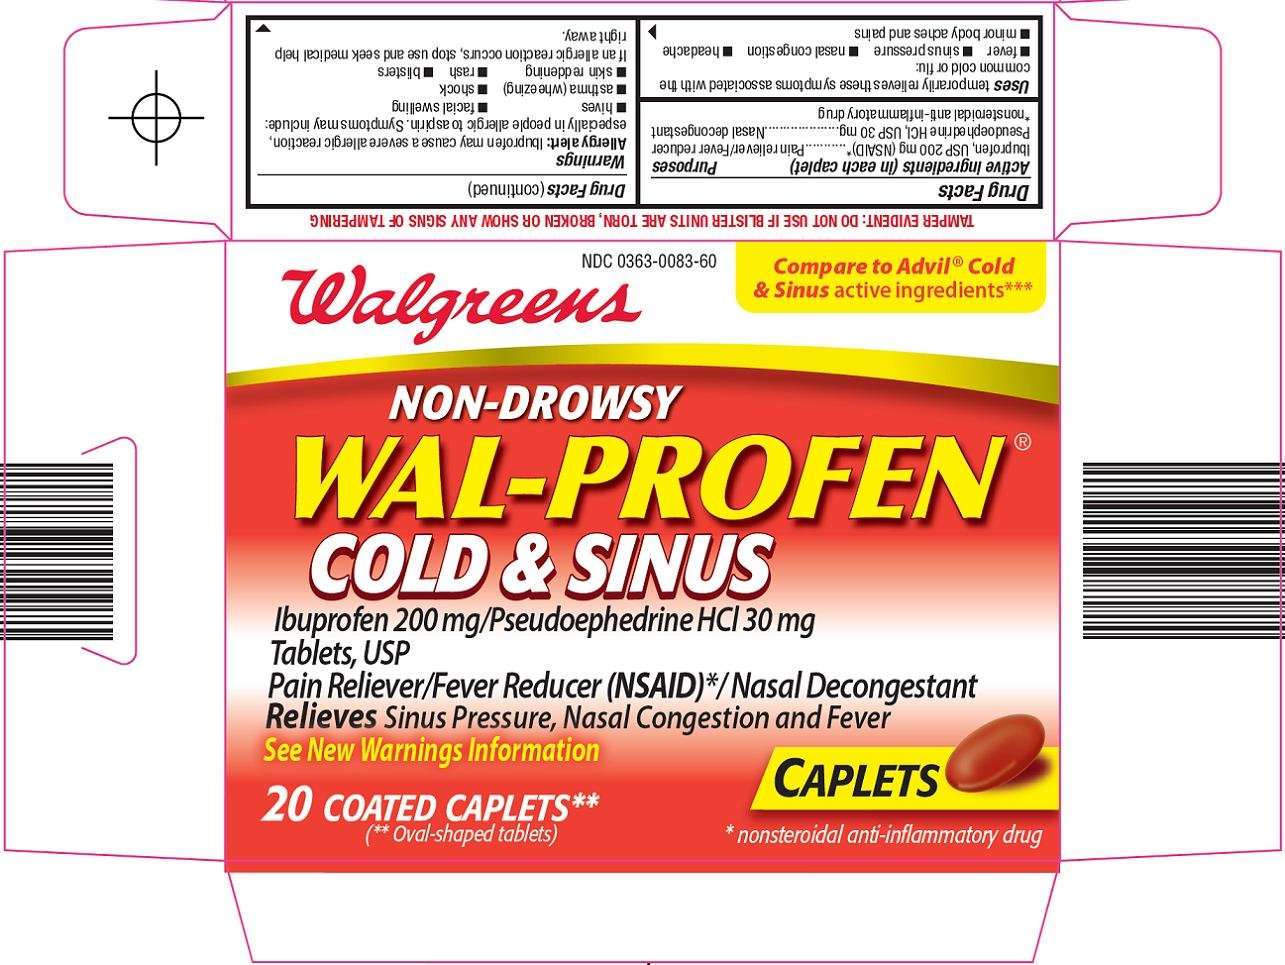 wal profen cold and sinus